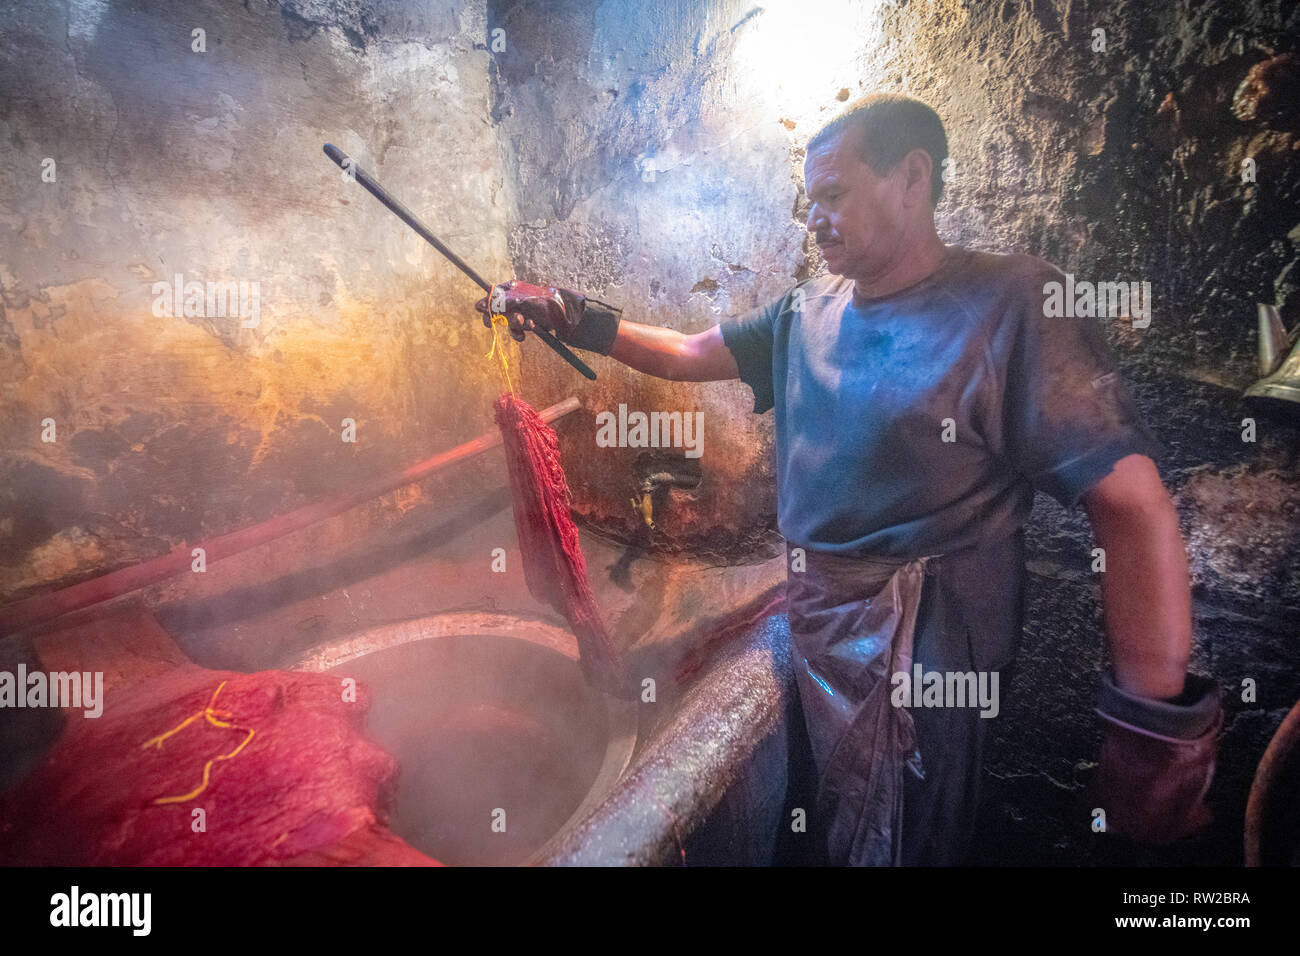 Man pulls out textile from fabric dyeing solution, Marrekech, Morocco Stock Photo